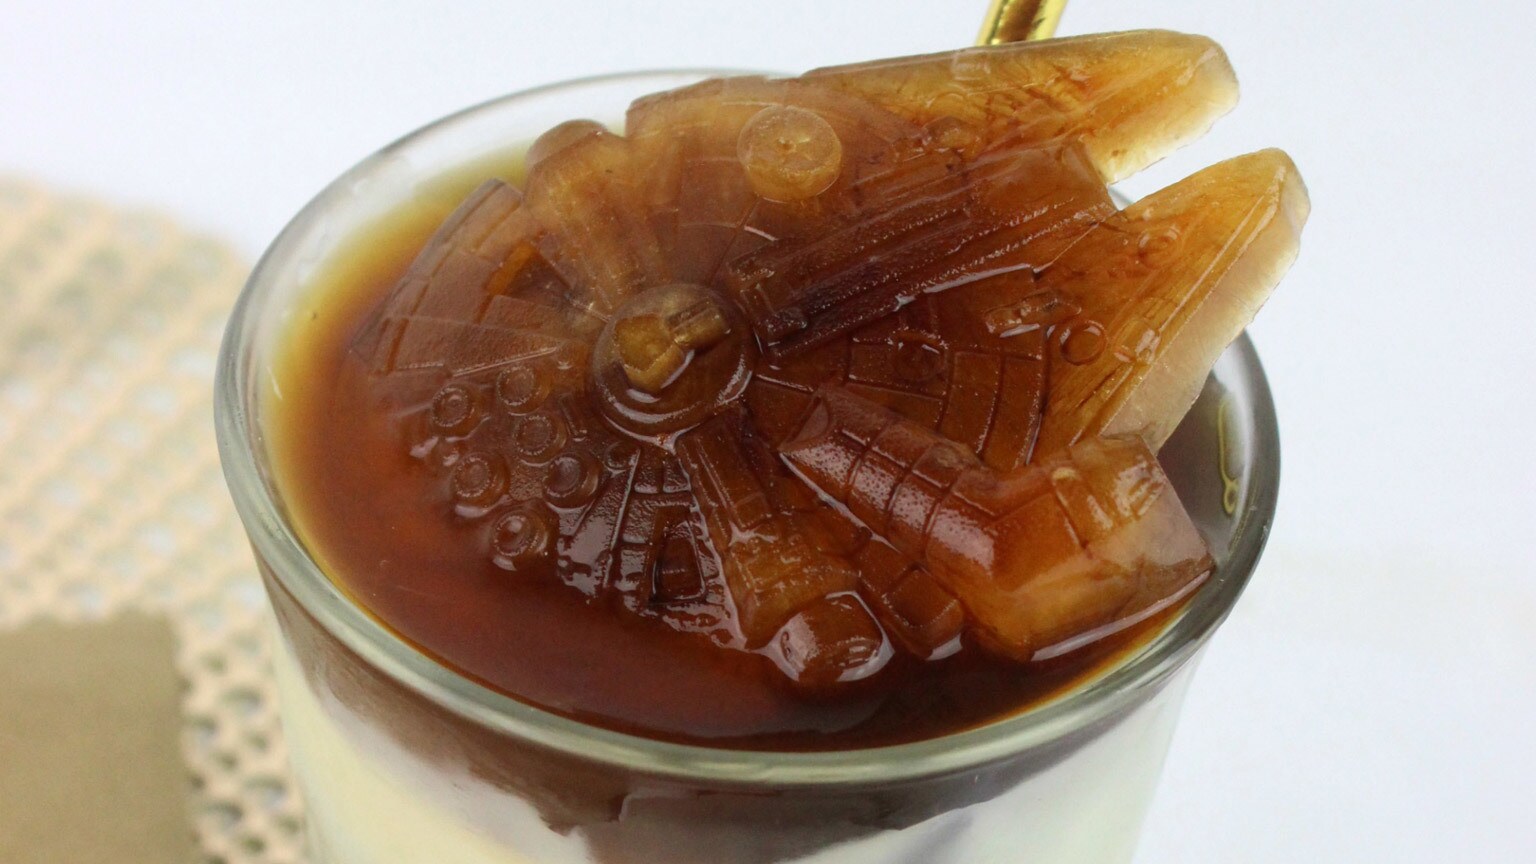 Jump to Hyperspace with a Cold Corellian Iced Coffee